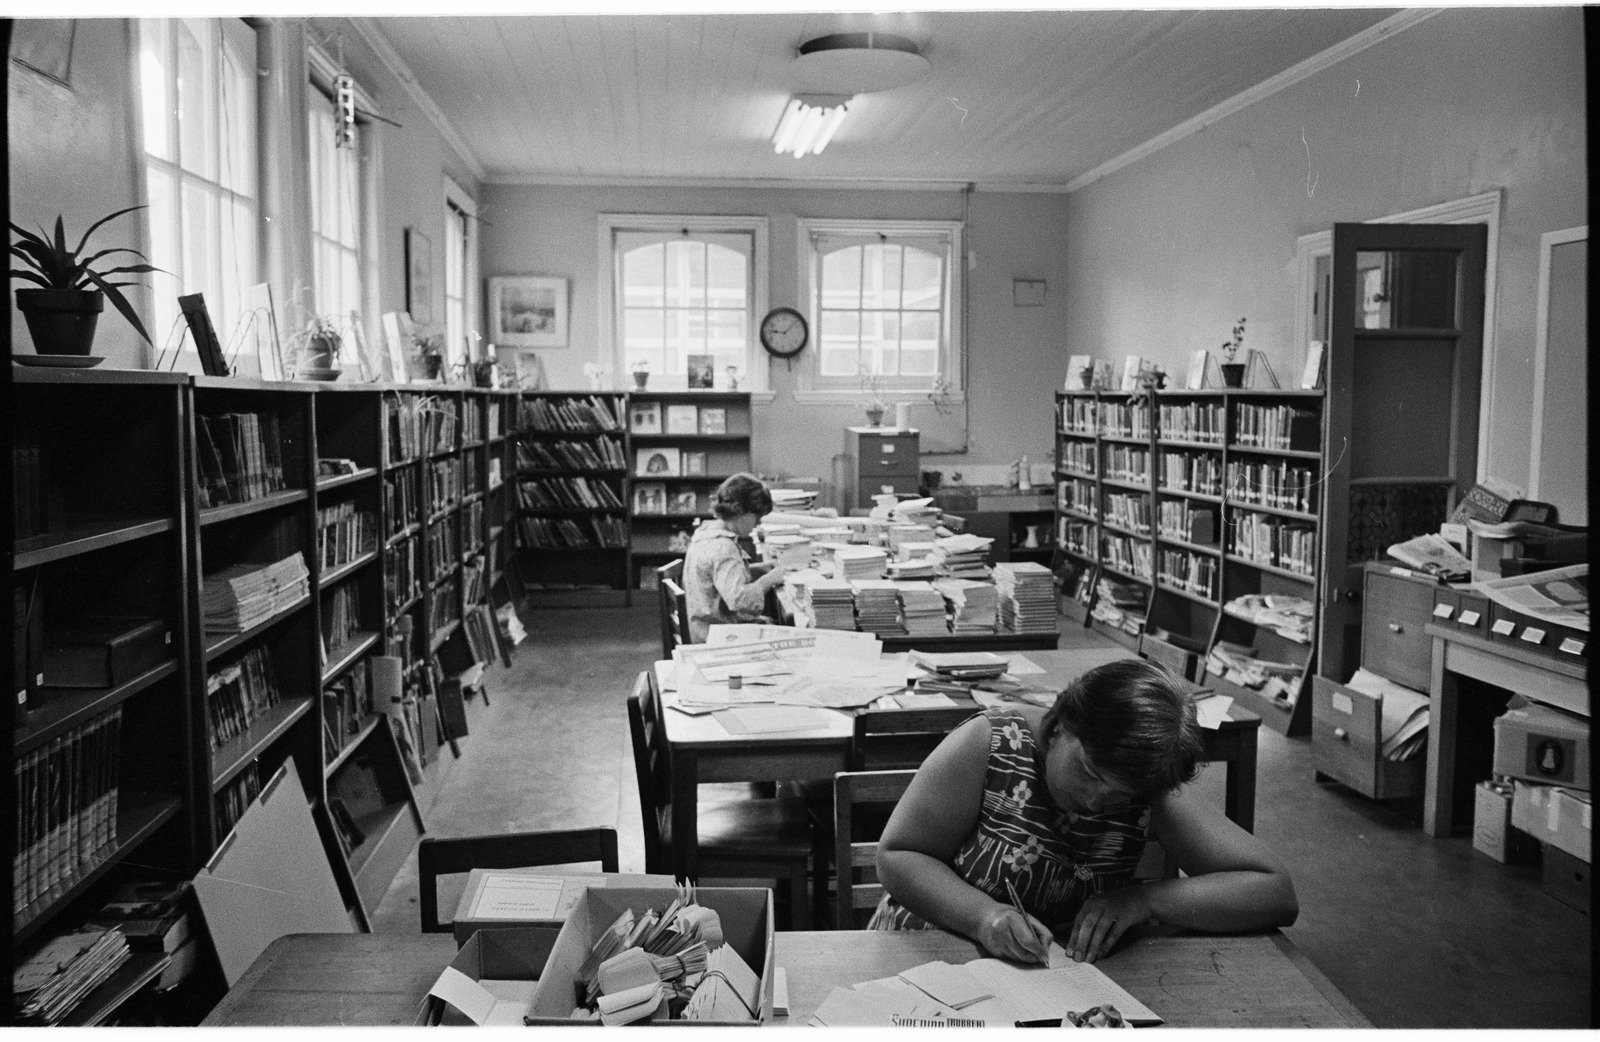 North Fitzroy school library with walls edged with bookshelves and 2 library staff working at desks